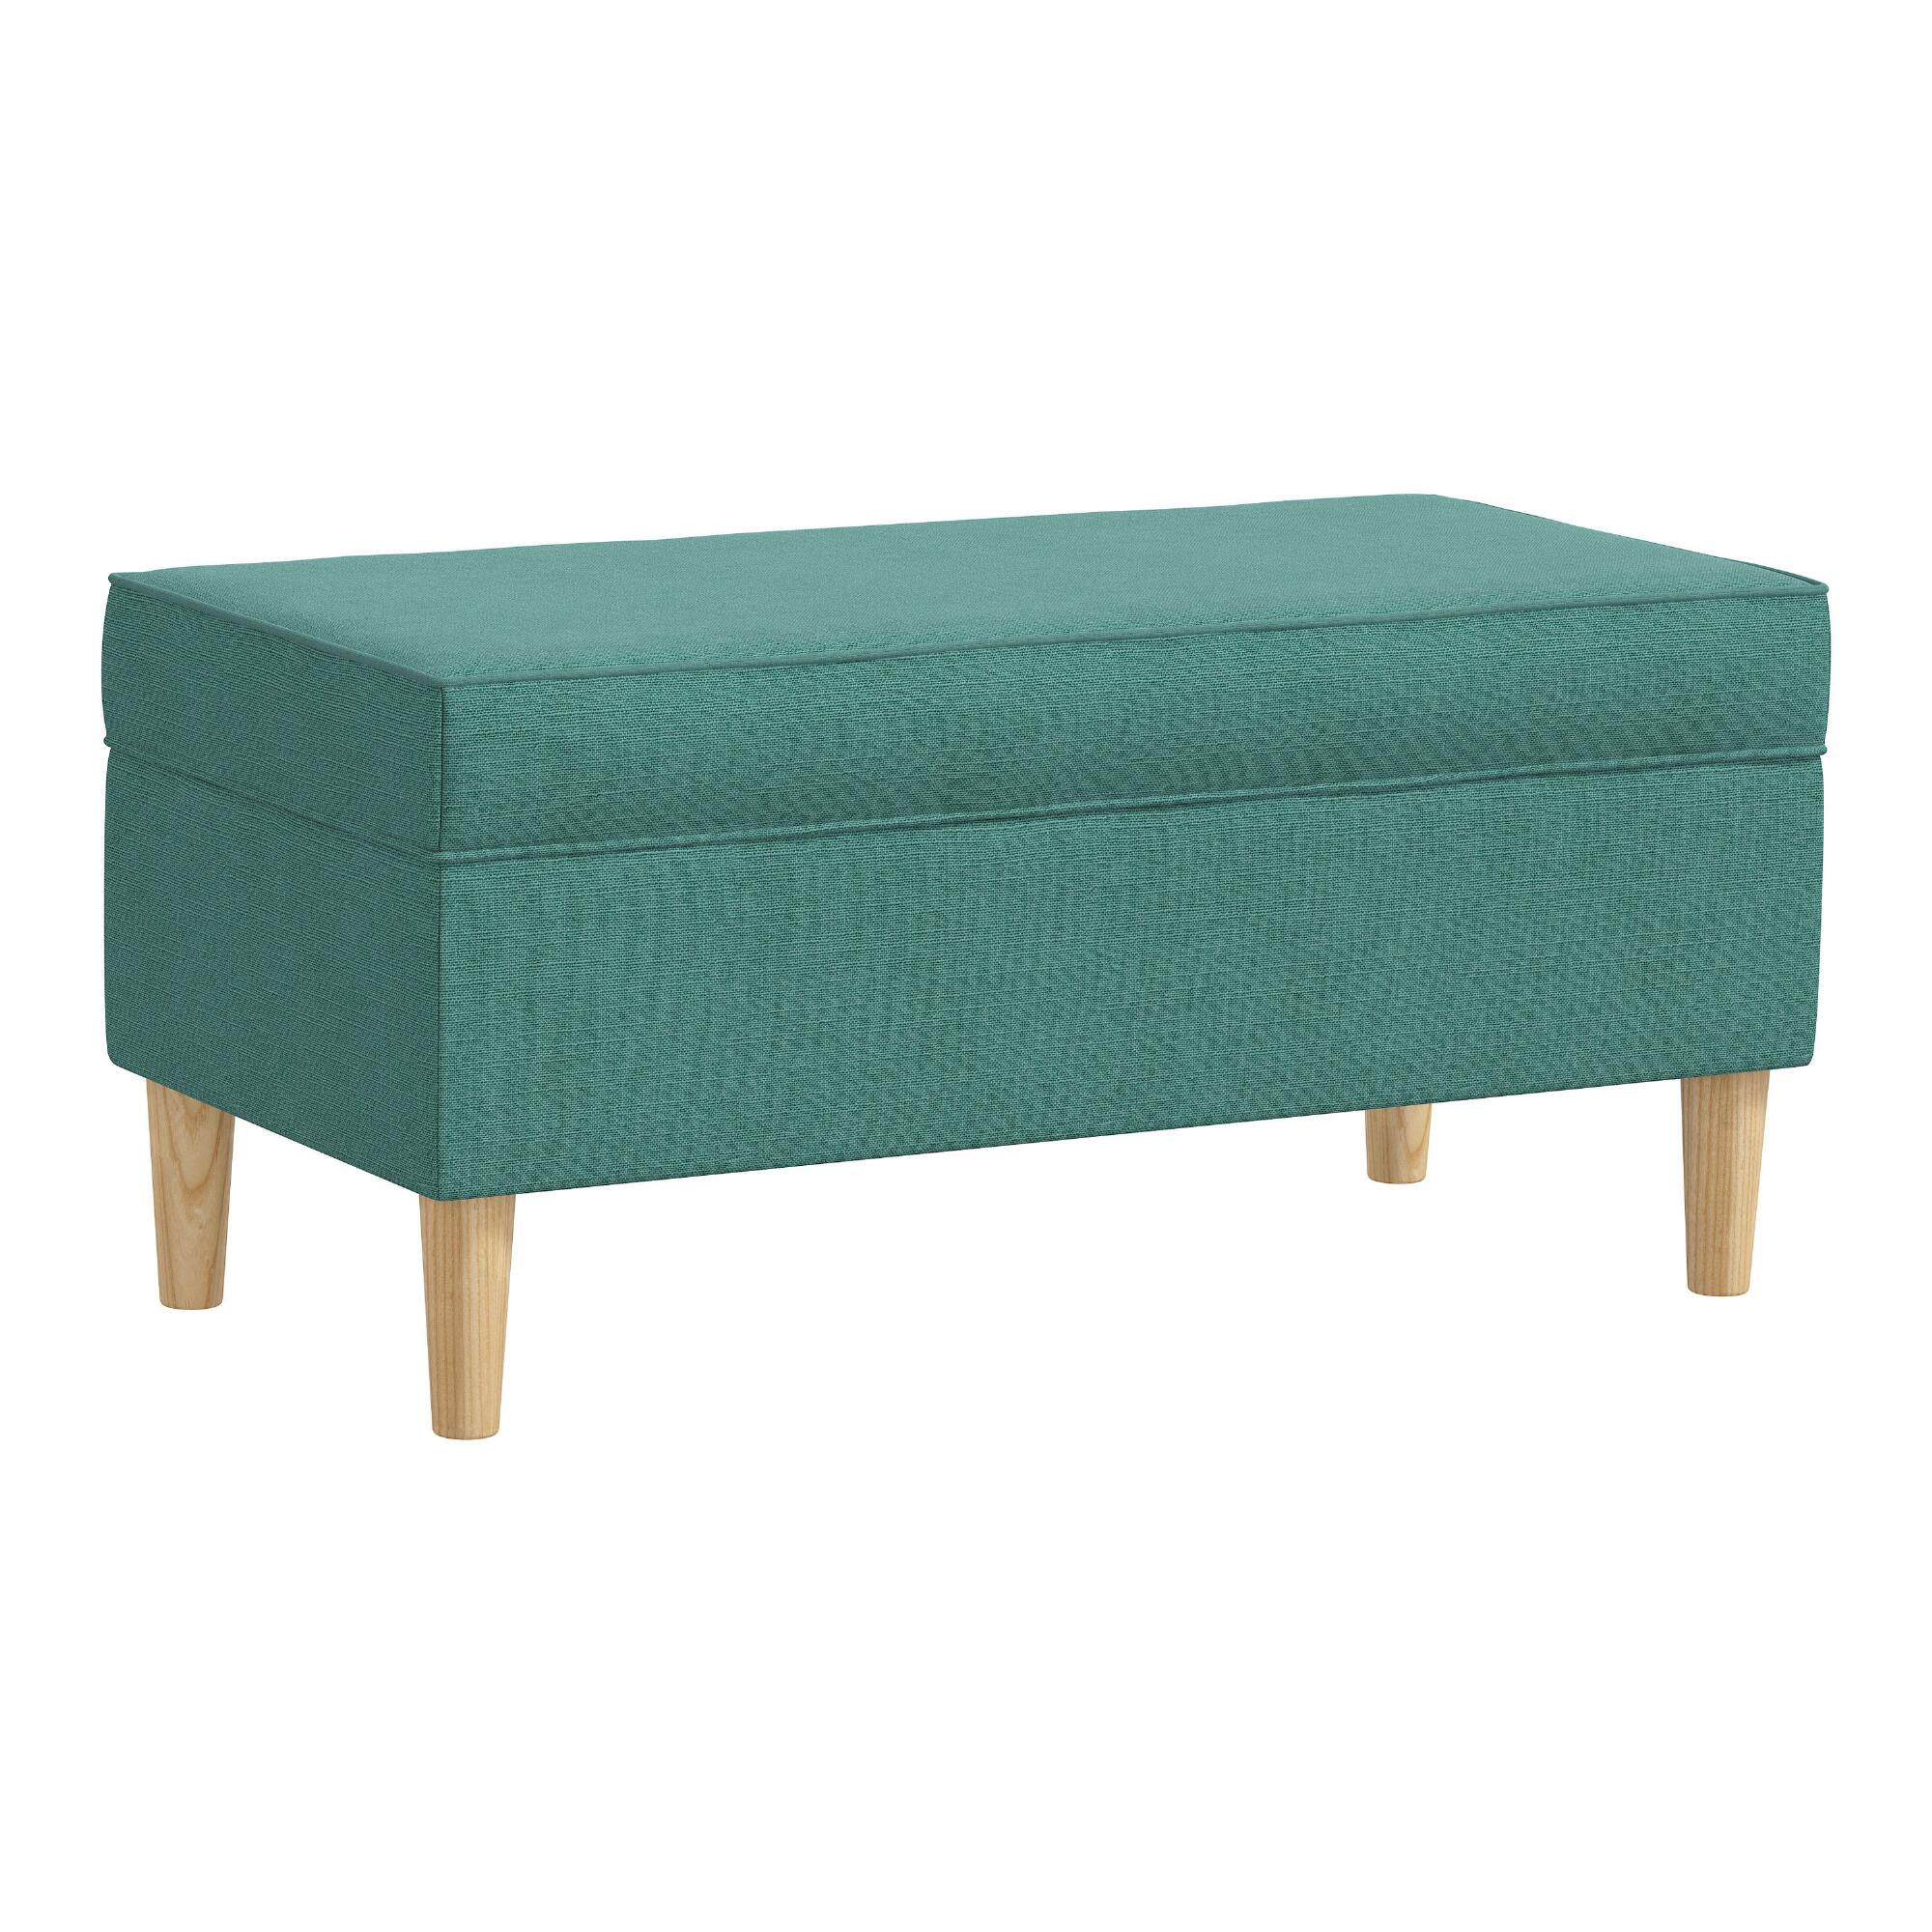 Linen Tabitha Upholstered Storage Bench: Green by World Market